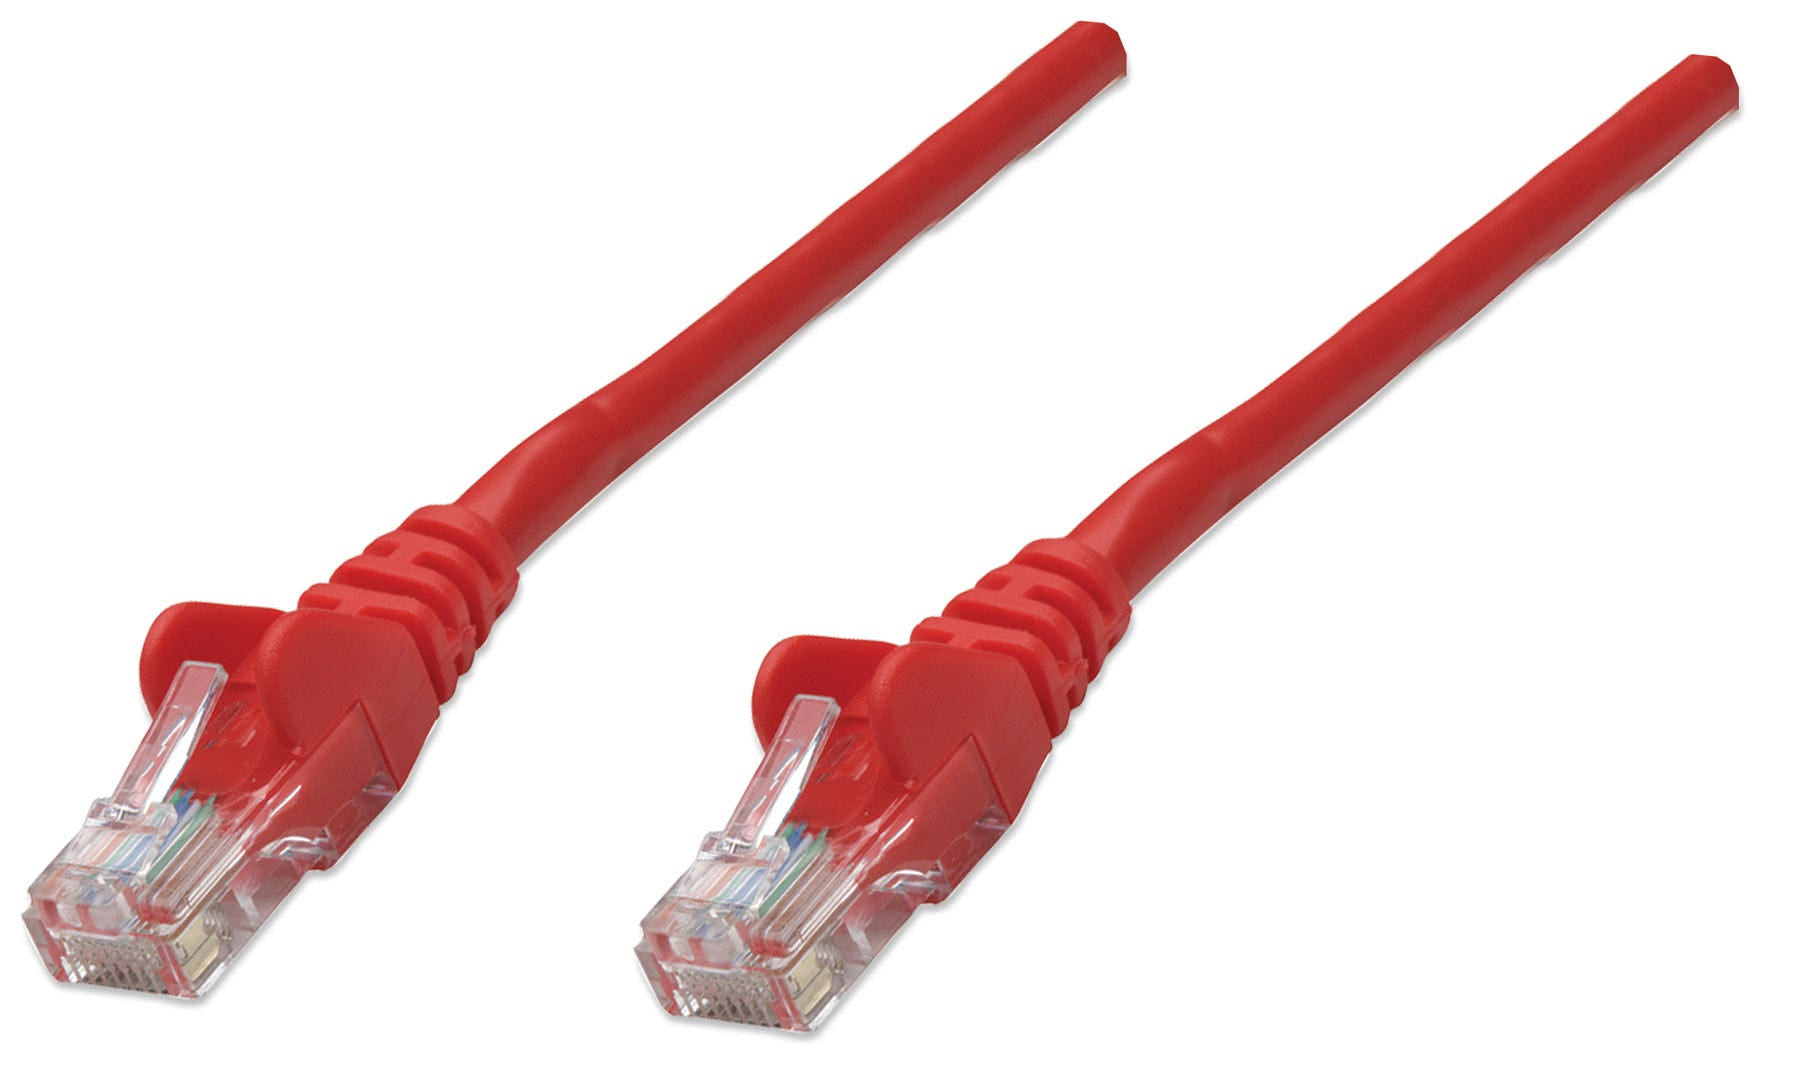 Intellinet Network Patch Cable, Cat5e, 20m, Red, CCA, U/UTP, PVC, RJ45, Gold Plated Contacts, Snagless, Booted, Lifetime Warranty, Polybag